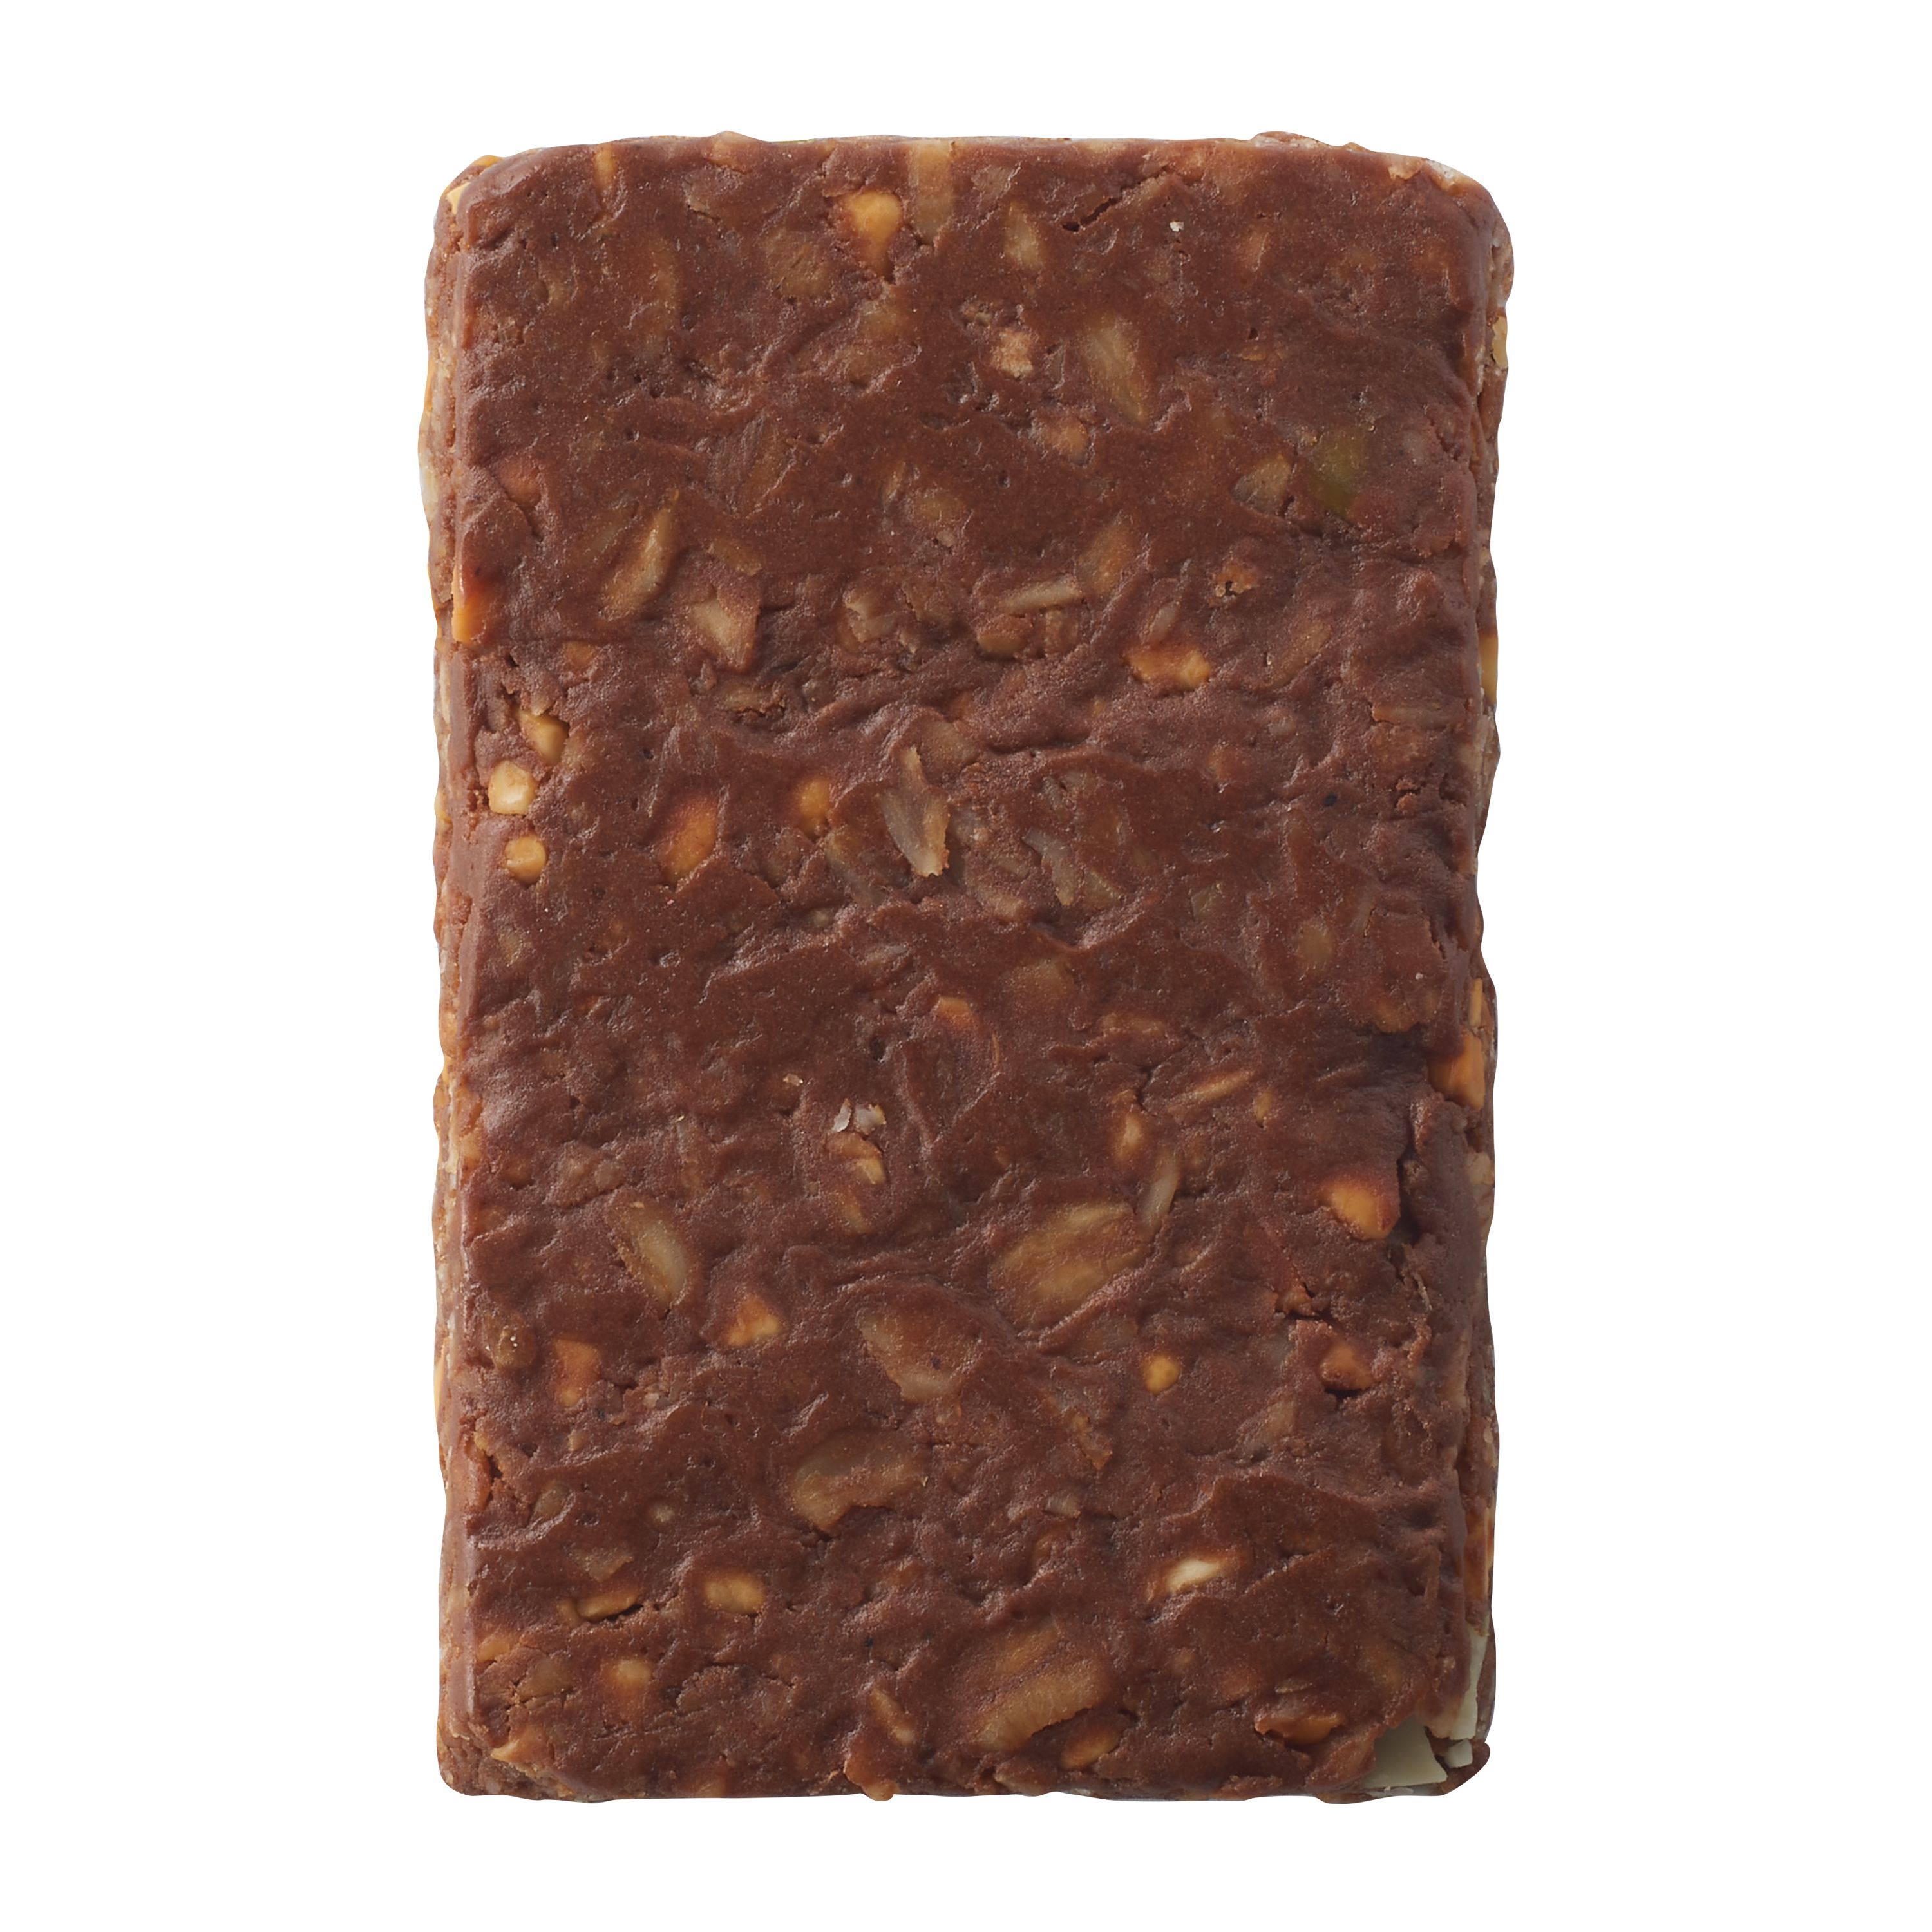 RXBAR A.M. Protein Bars Peanut Butter Dark Chocolate product image